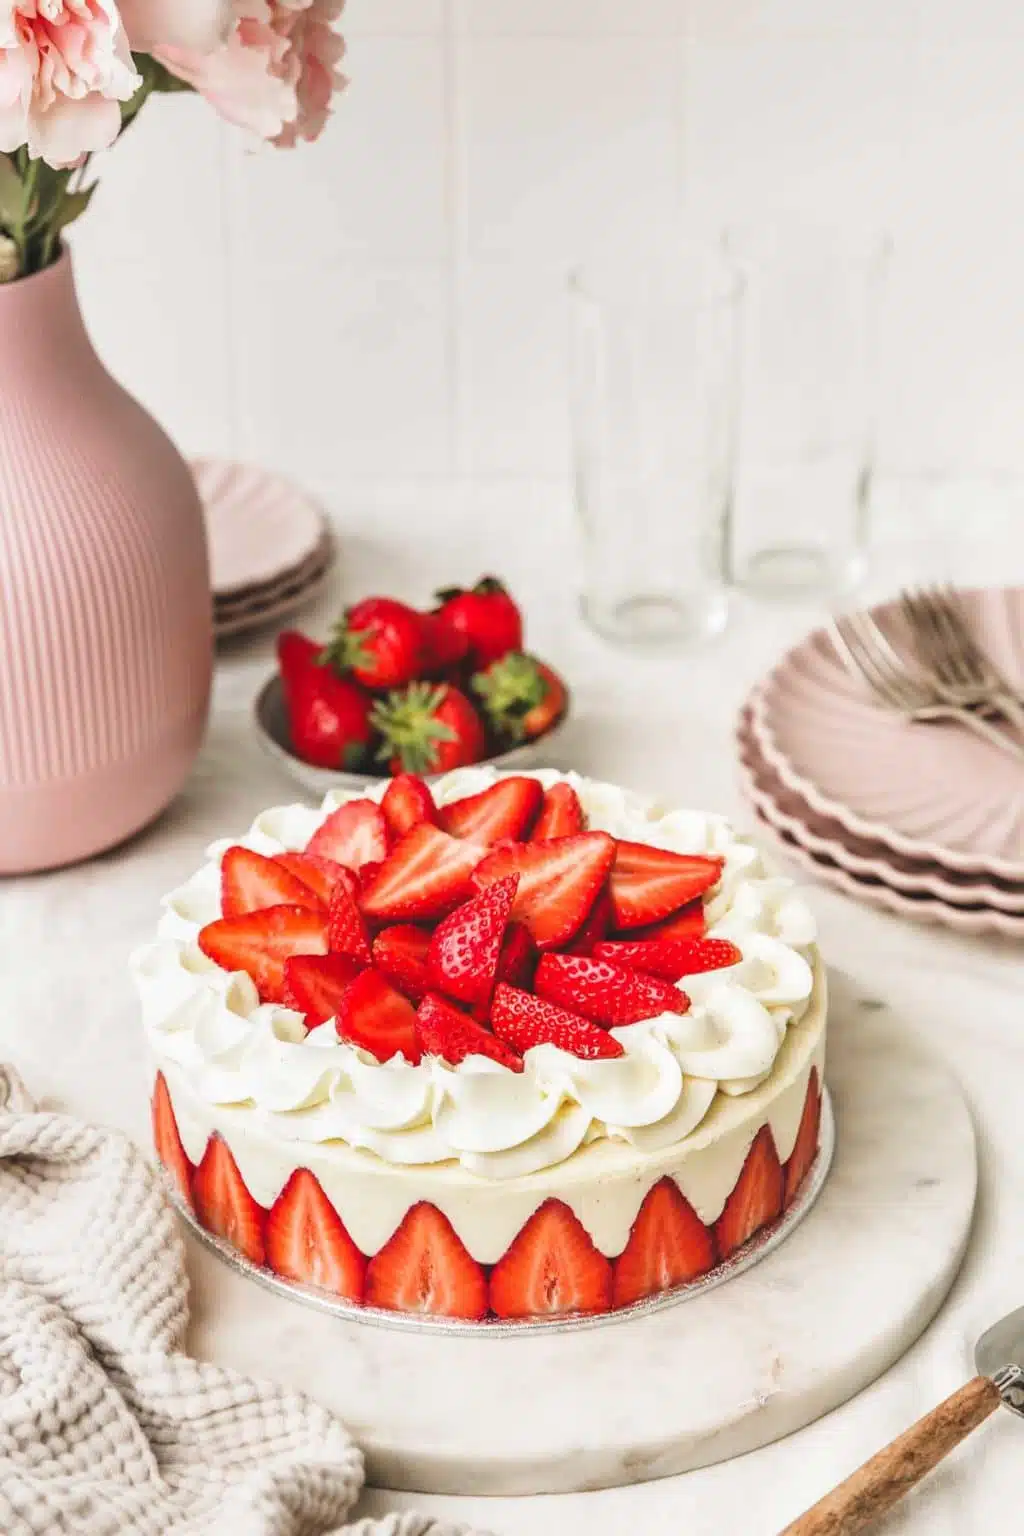 French Strawberry Fraisier Cake Recipe With Diplomat Cream